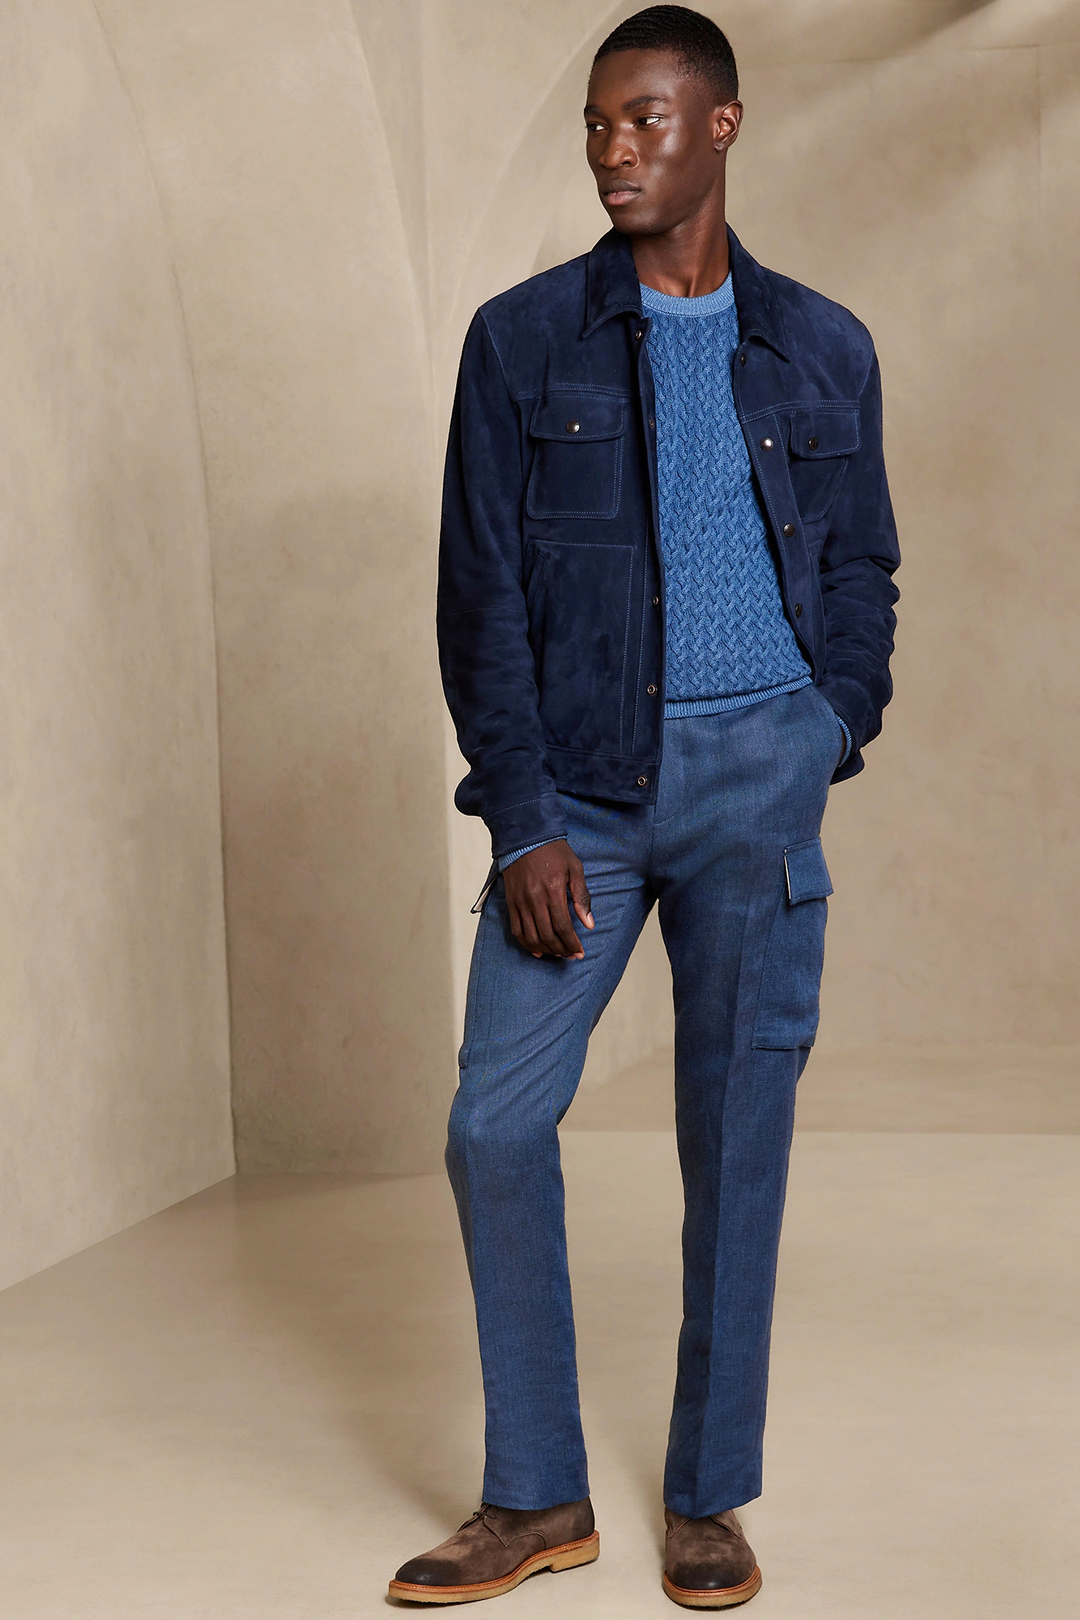 Navy suede shirt jacket, blue sweater, blue cargo pants, and brown derby shoes outfit